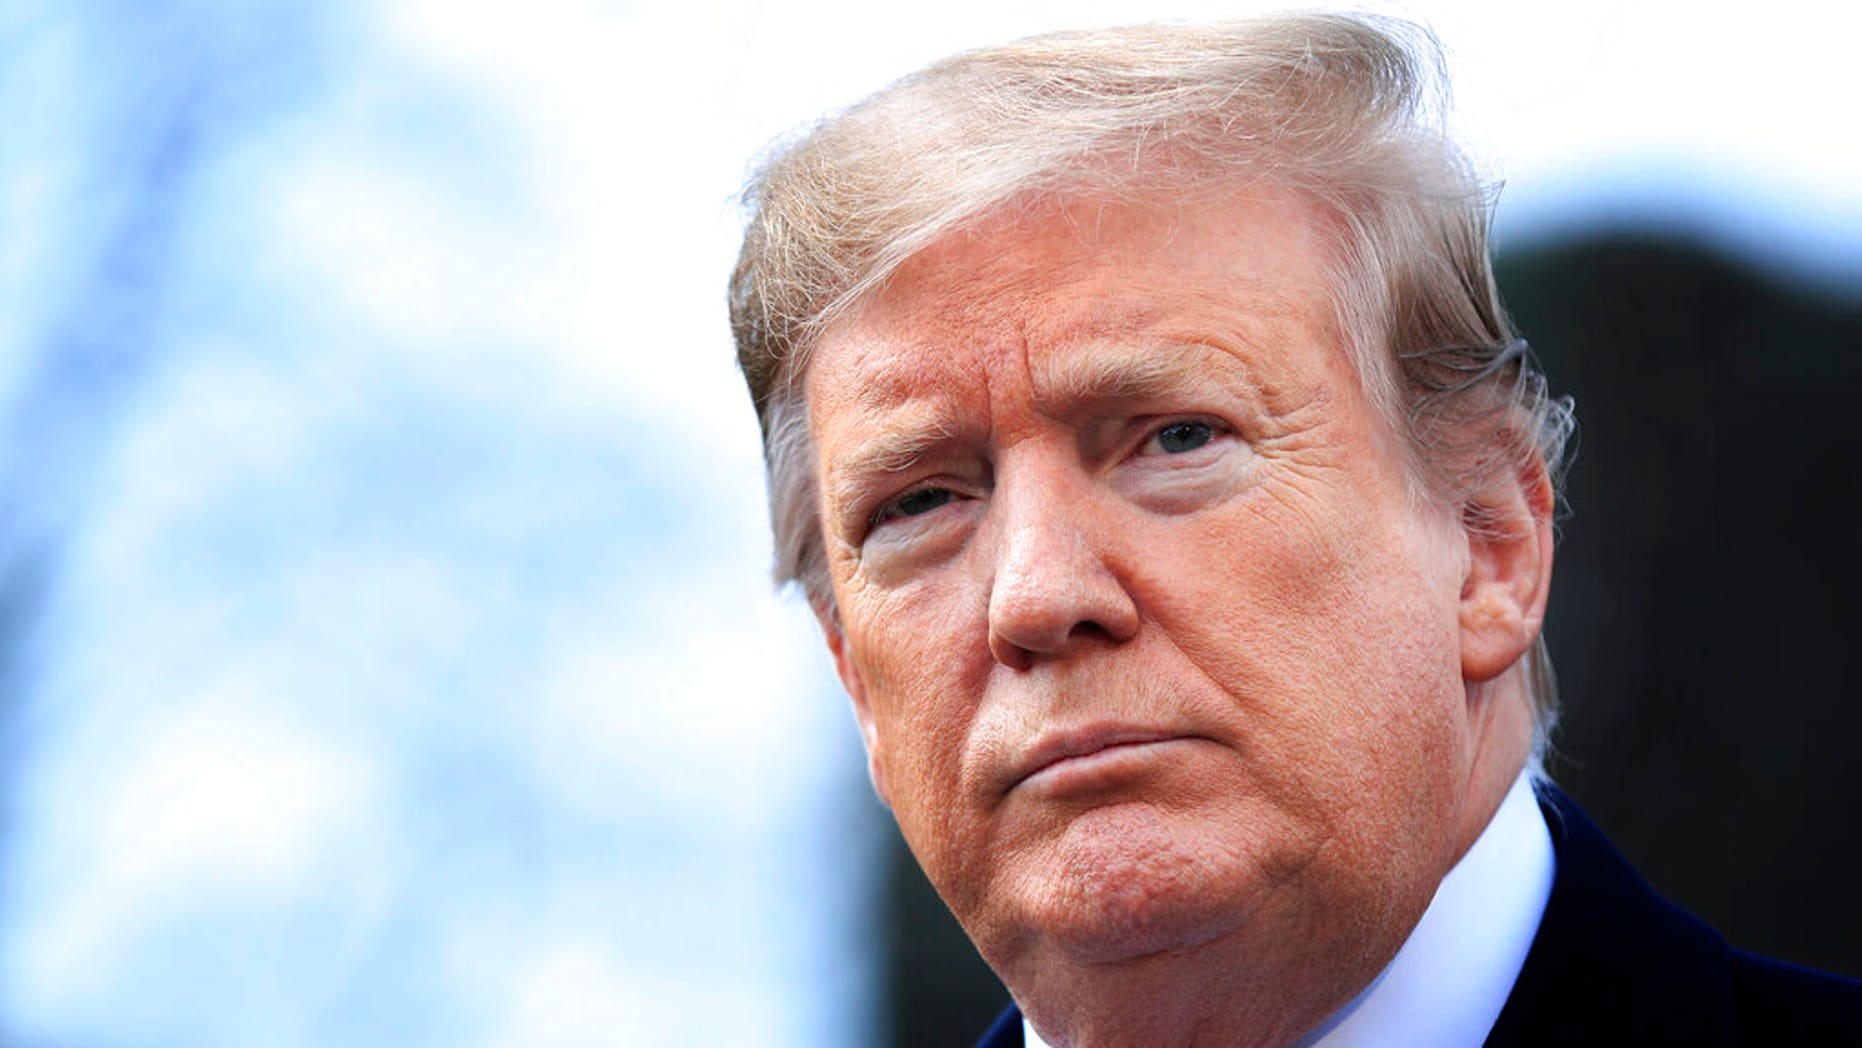 FILE -- In this Wednesday, March 20, 2019 file photo, President Donald Trump speaks to reporters before leaving the White House in Washington. (AP Photo/Manuel Balce Ceneta)